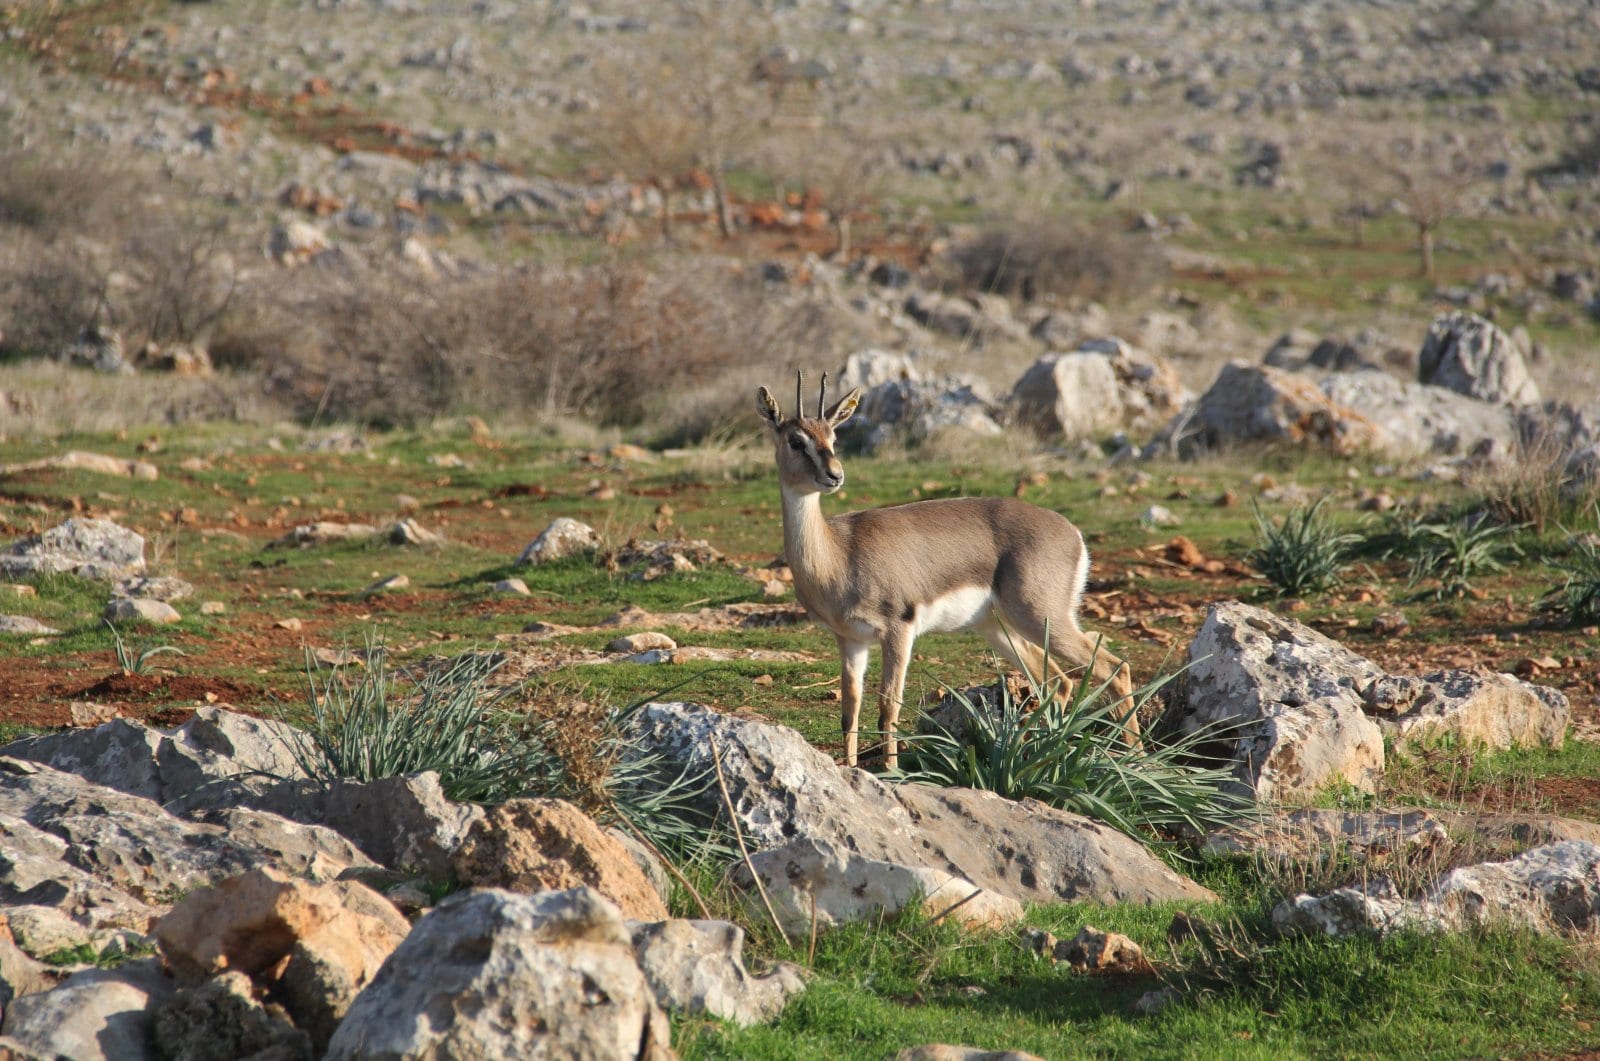 Small population of mountain gazelles continues to grow in southern Turkey&#8217;s Hatay